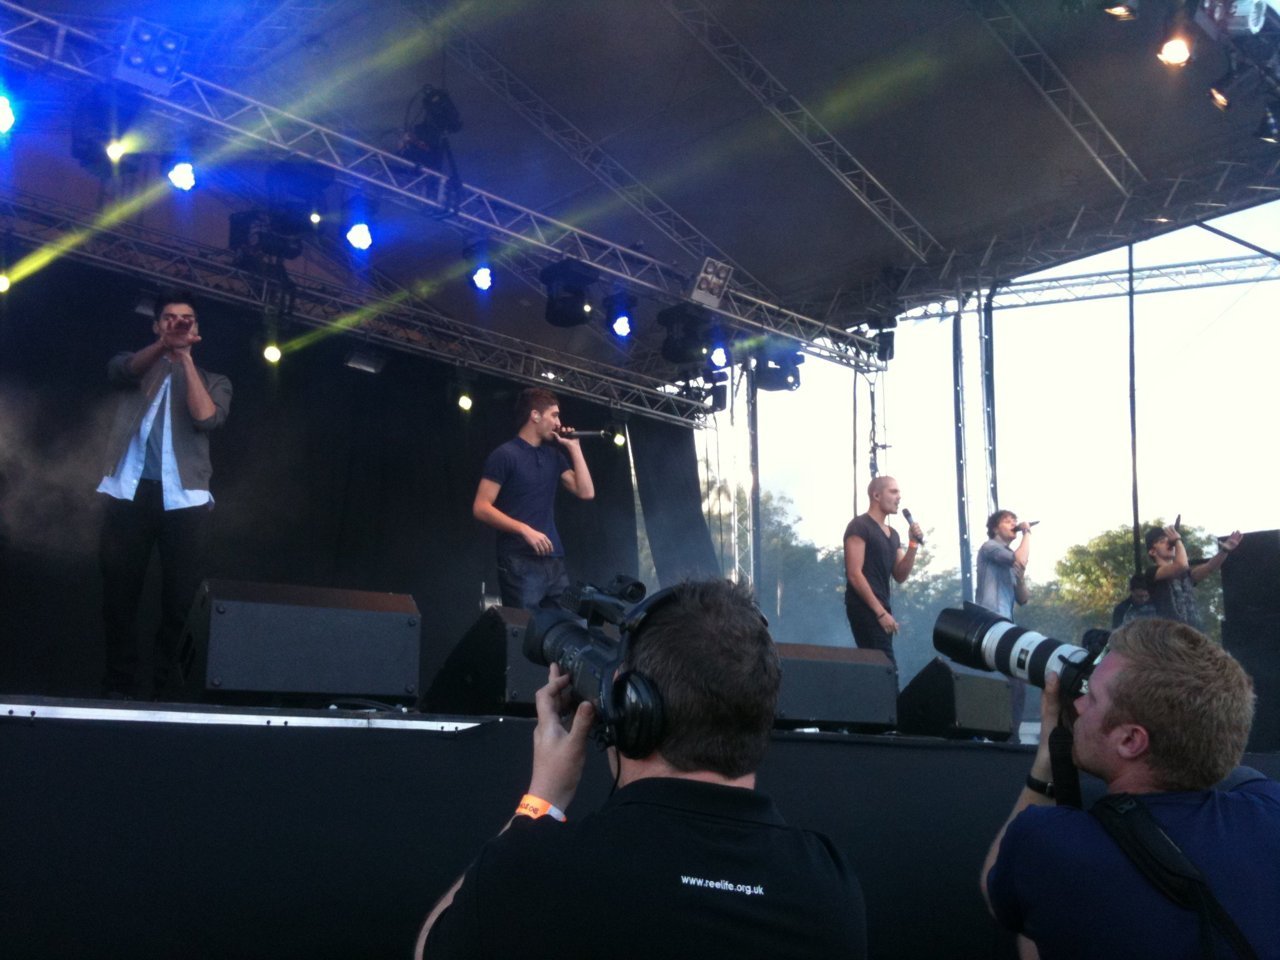 The Wanted on stage at 2011 Live in Stoke.